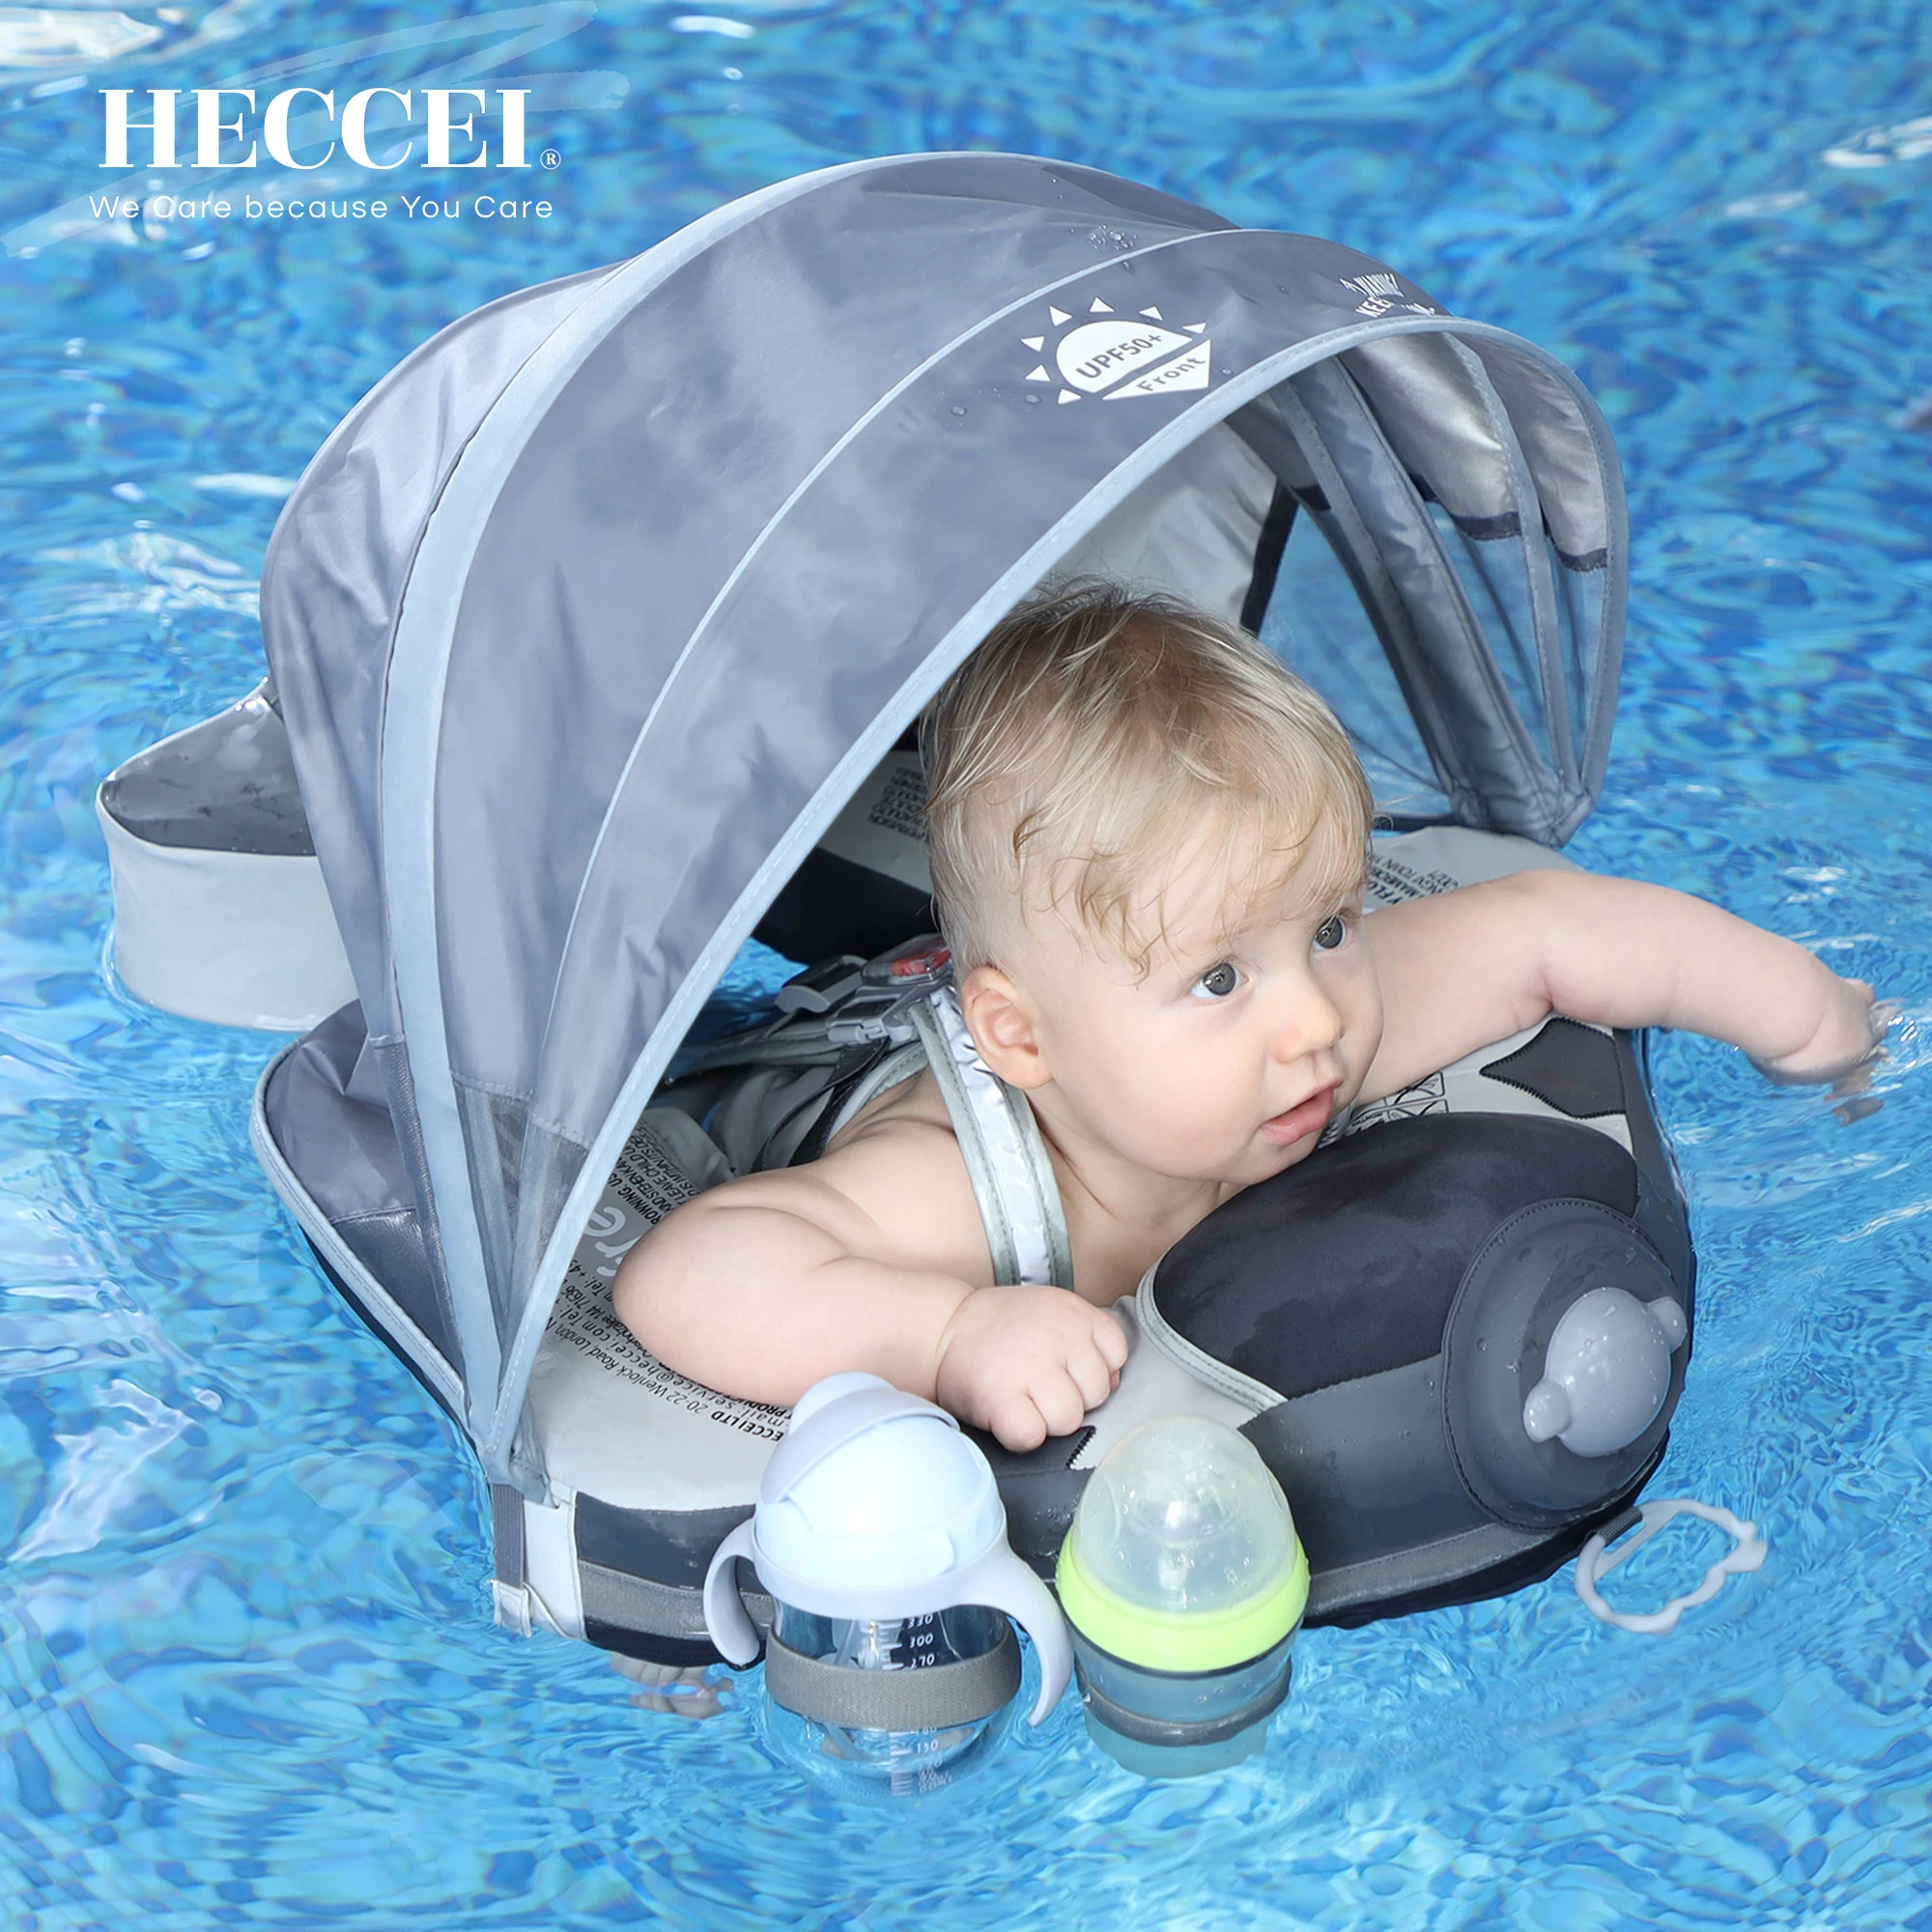 Heccei Newest No.07 Airplane Mambobaby Baby Float With Sun Canopy And Tail Non-inflatable Floats Swim Toys Infant Swimming Ring - Baby and Kids Floats 